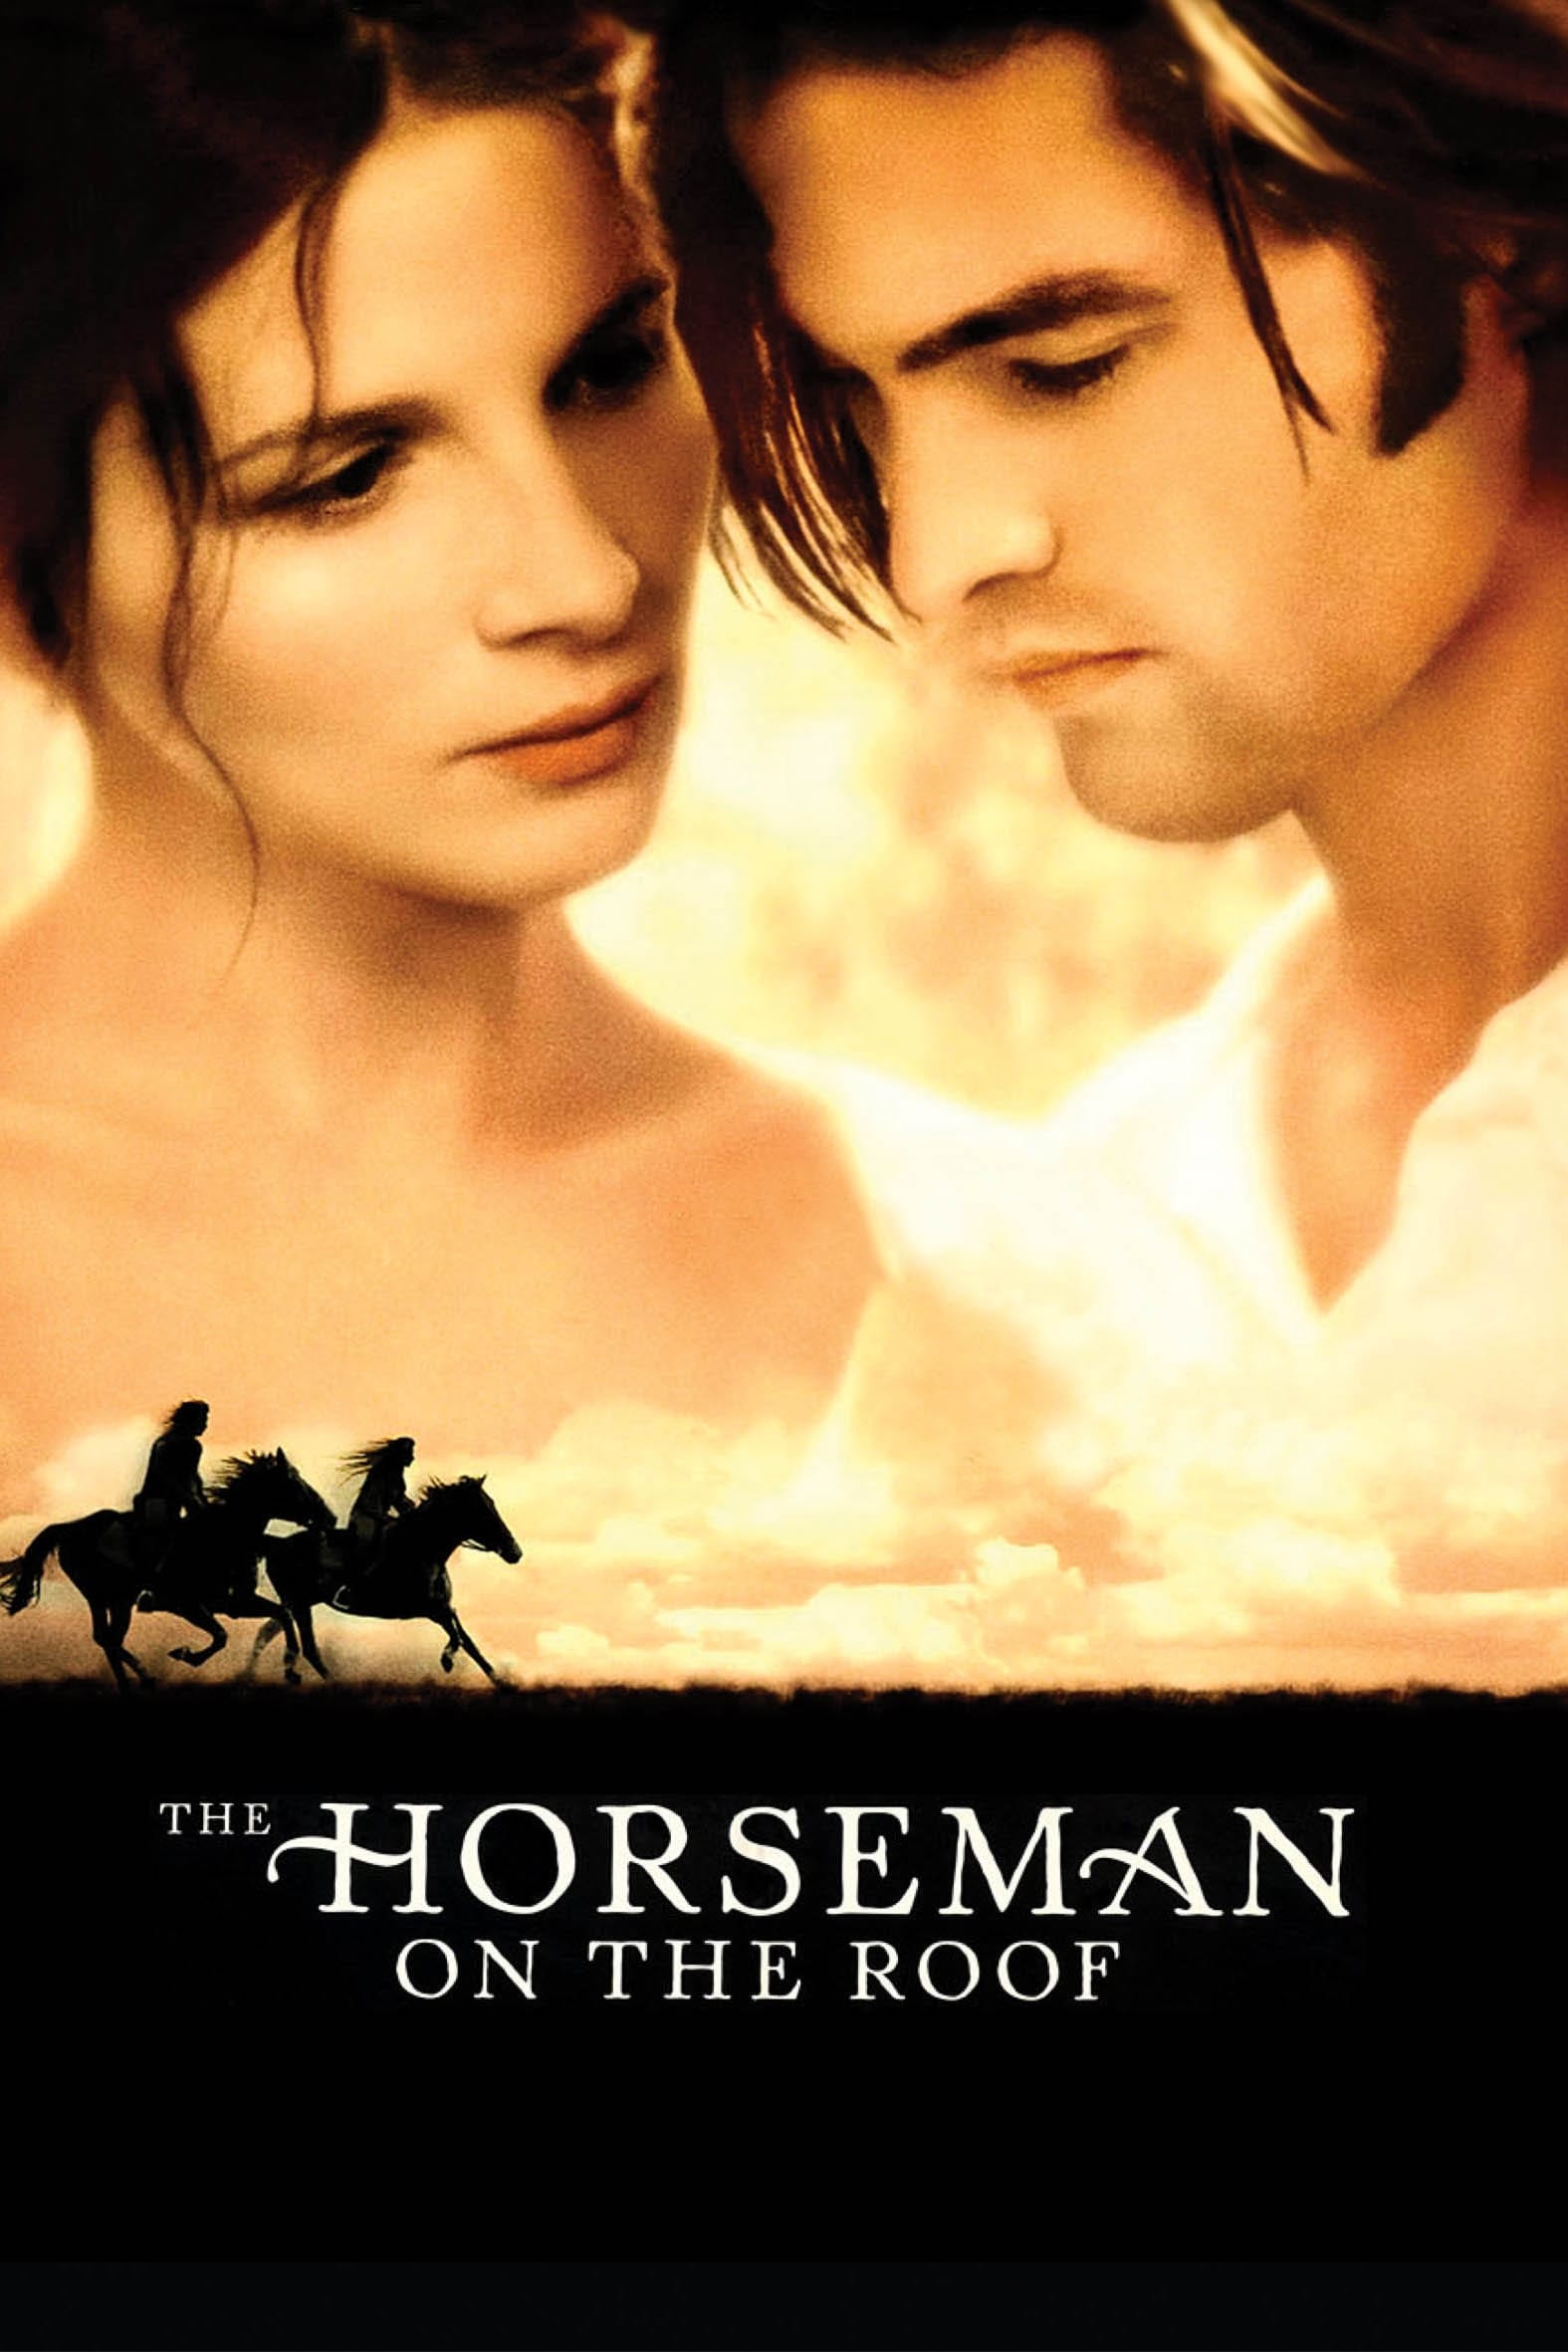 The Horseman on the Roof (1995)